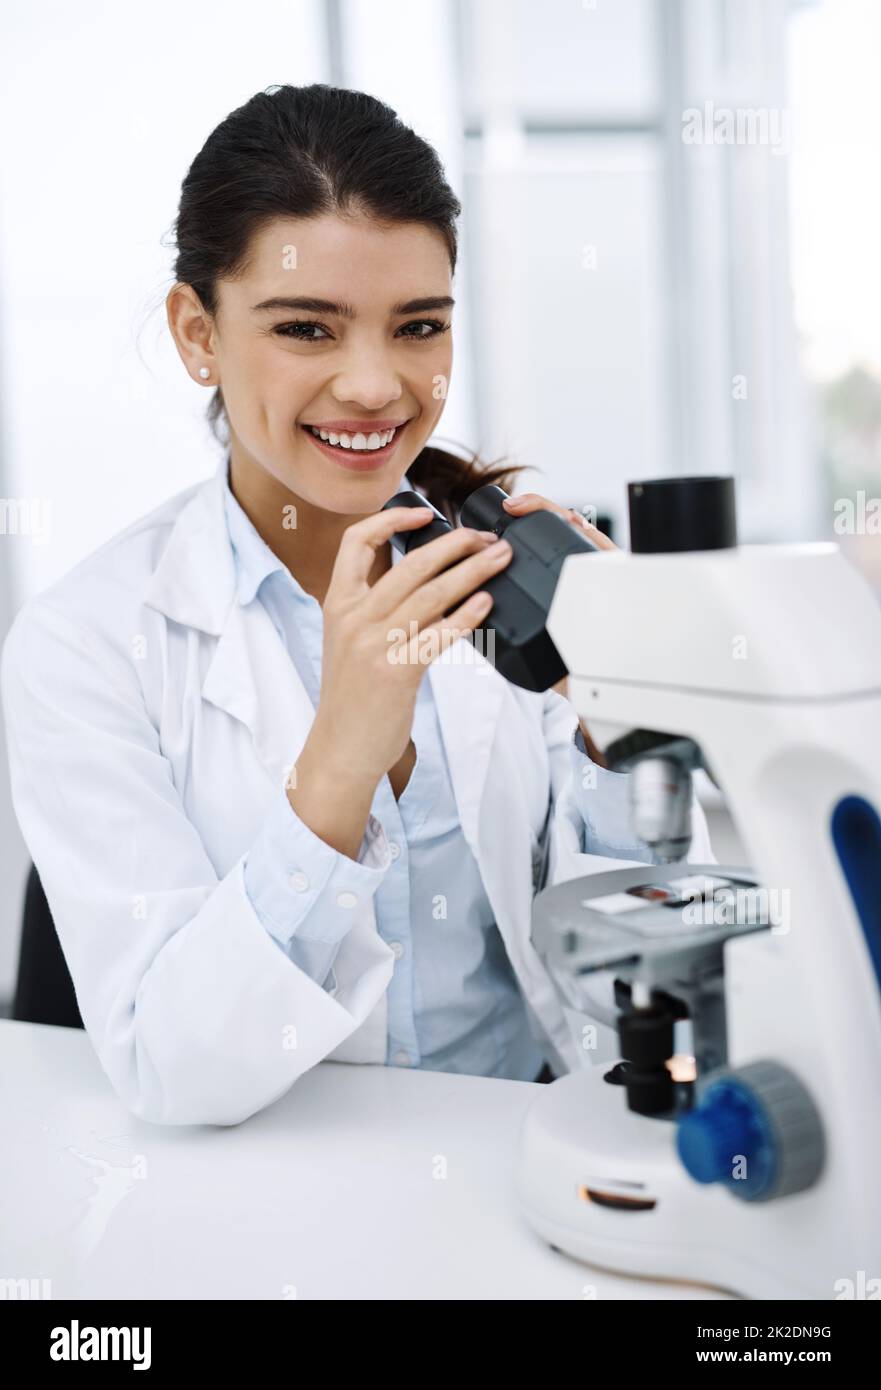 Ive always been curious about the world. Shot of a young scientist using a microscope in a lab. Stock Photo